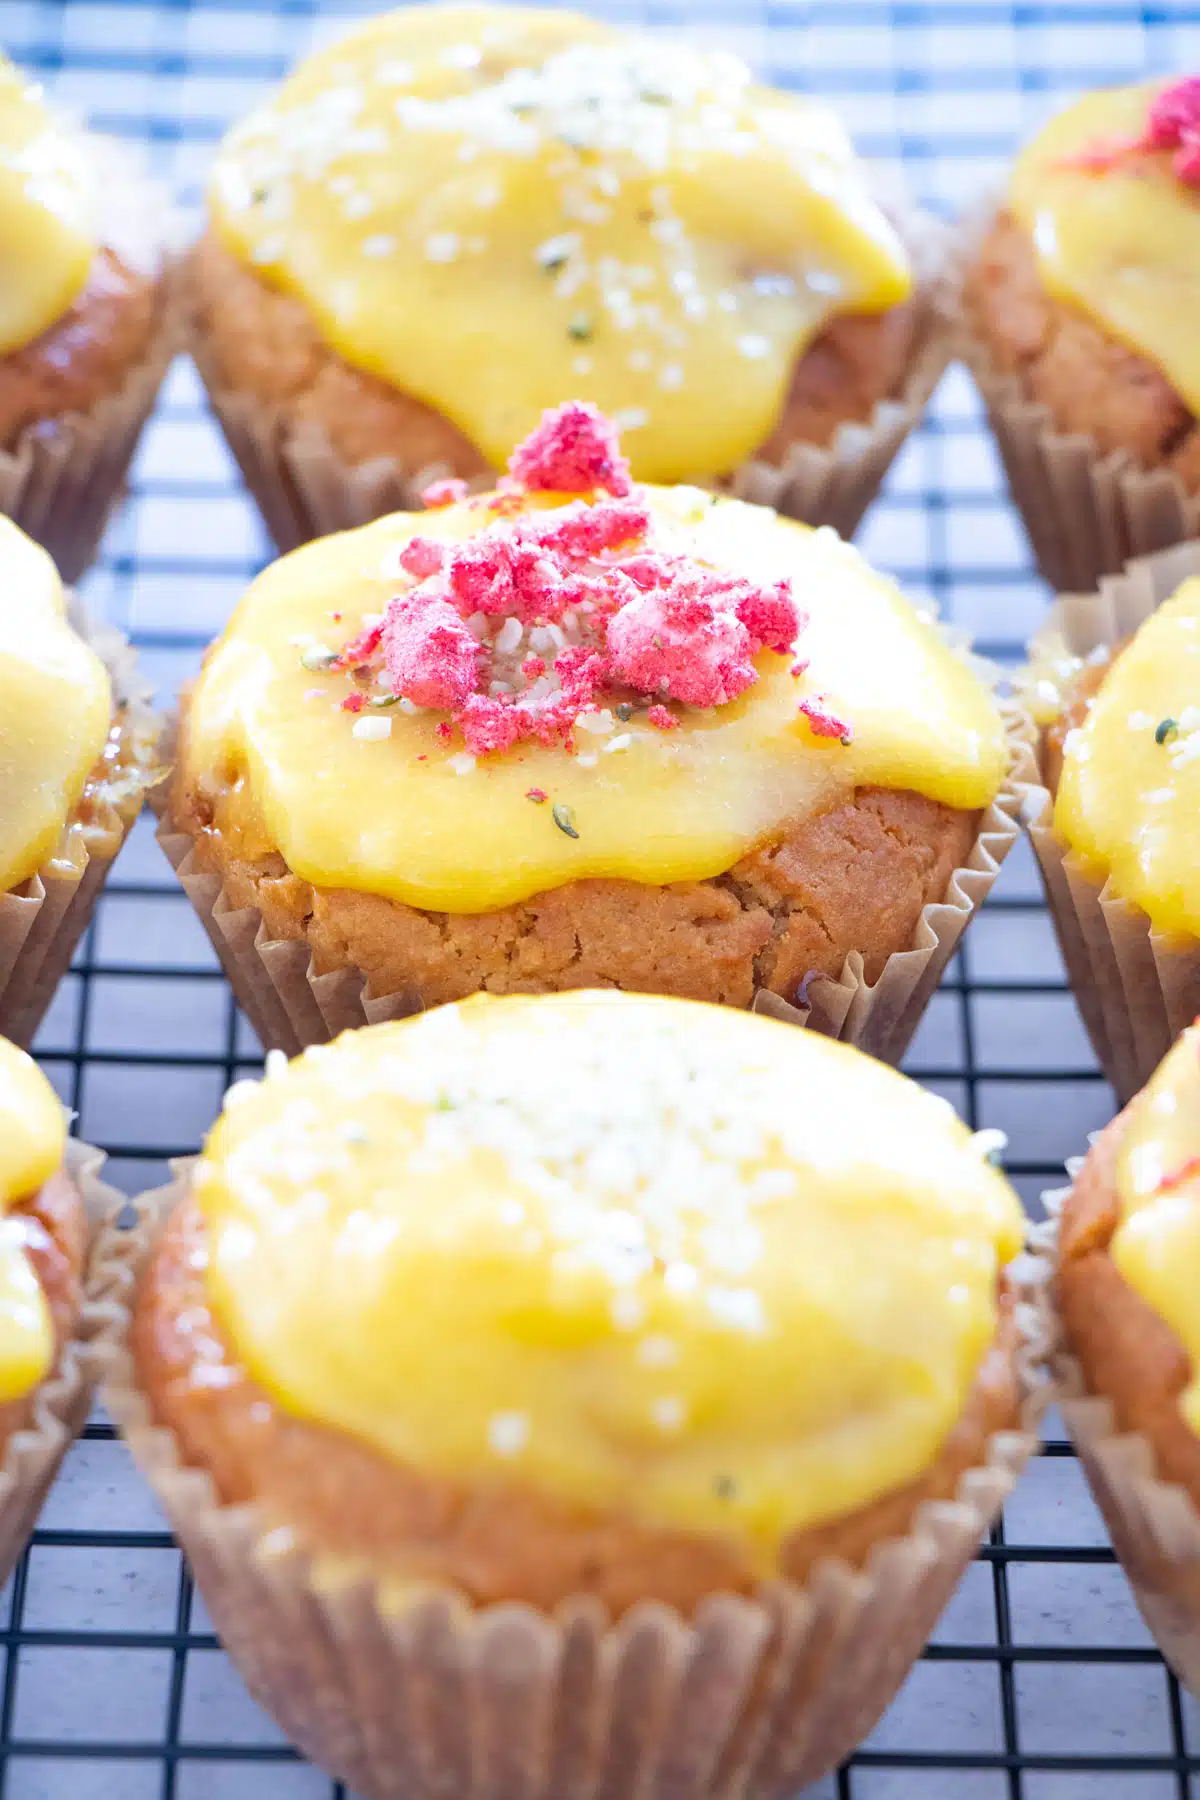 Nine lemon curd muffins have been laid out on a black cooling rack. Each have been topped with extra bright yellow lemon curd and sprinkled with freeze dried strawberries or hemp seeds.